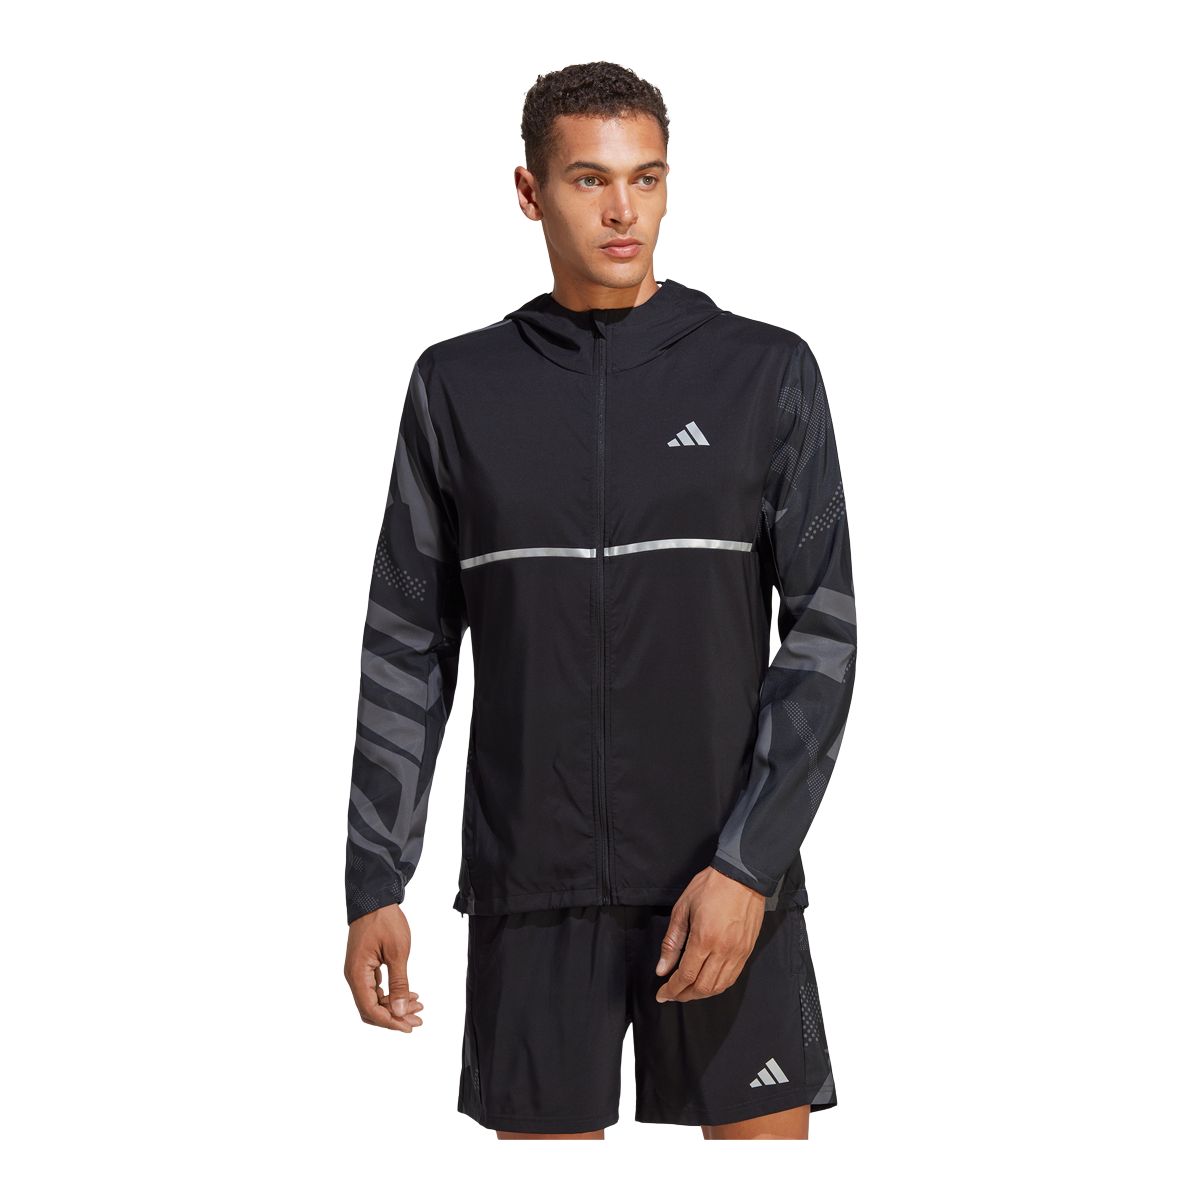 Image of adidas Men's Own The Run Ssnl Jacket